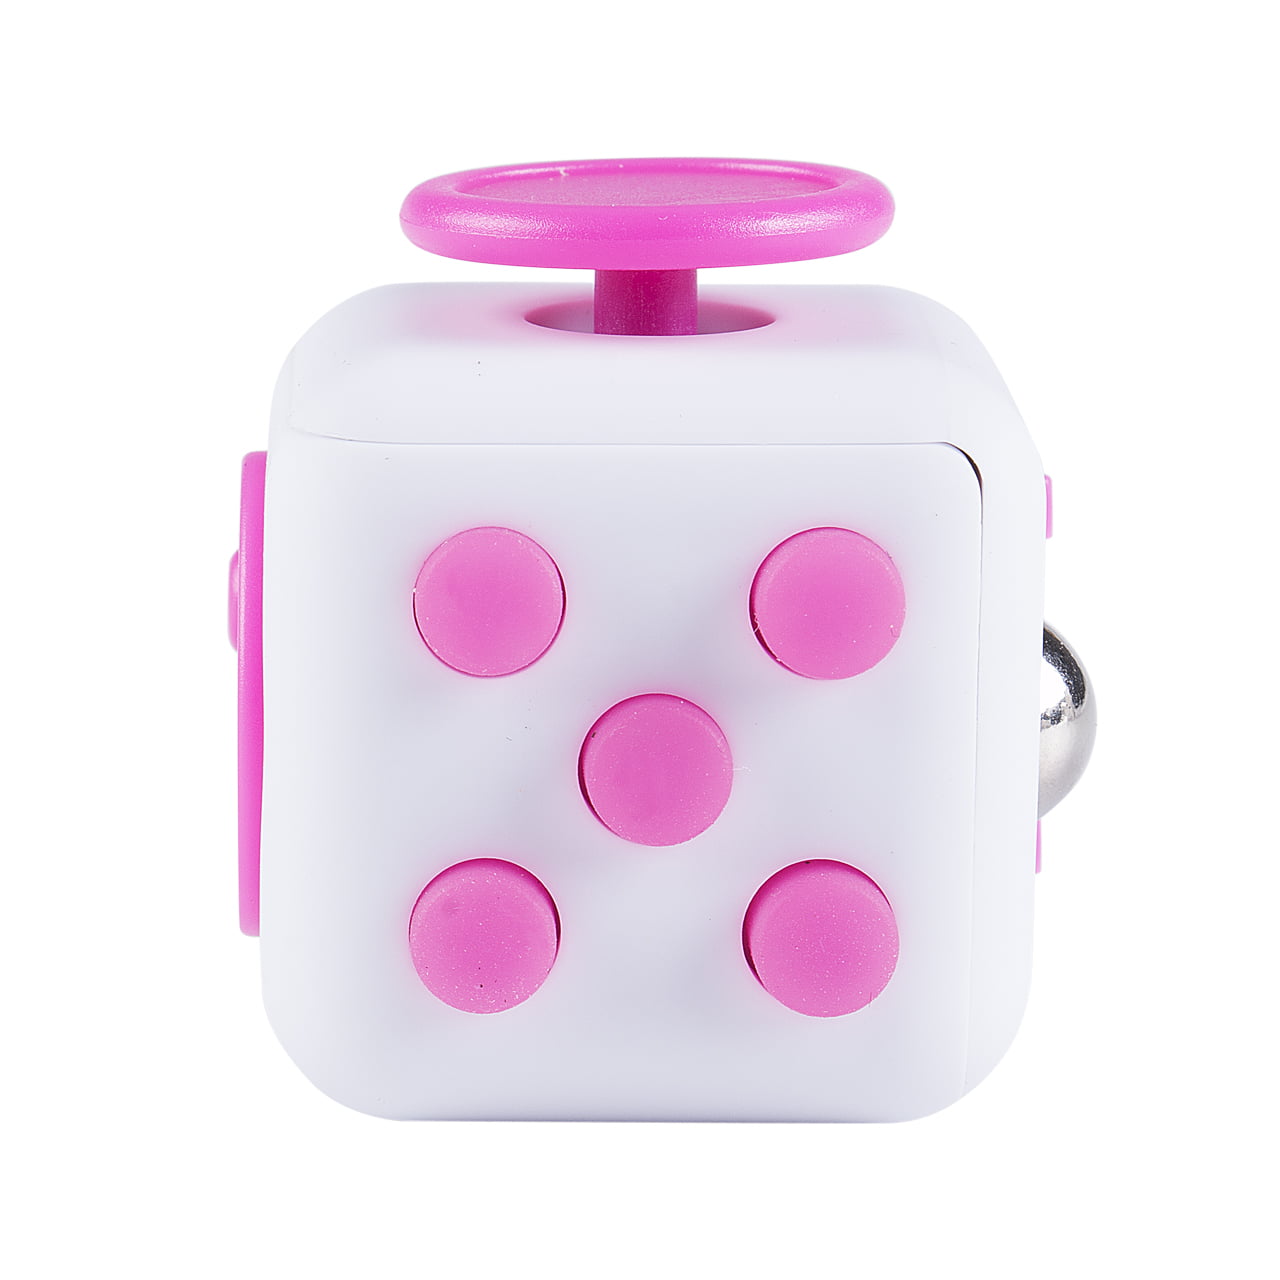 Magic Fidget Cube Mini Anti Anxiety Stress Funny Toy Stress Relief Gadgets Gifts